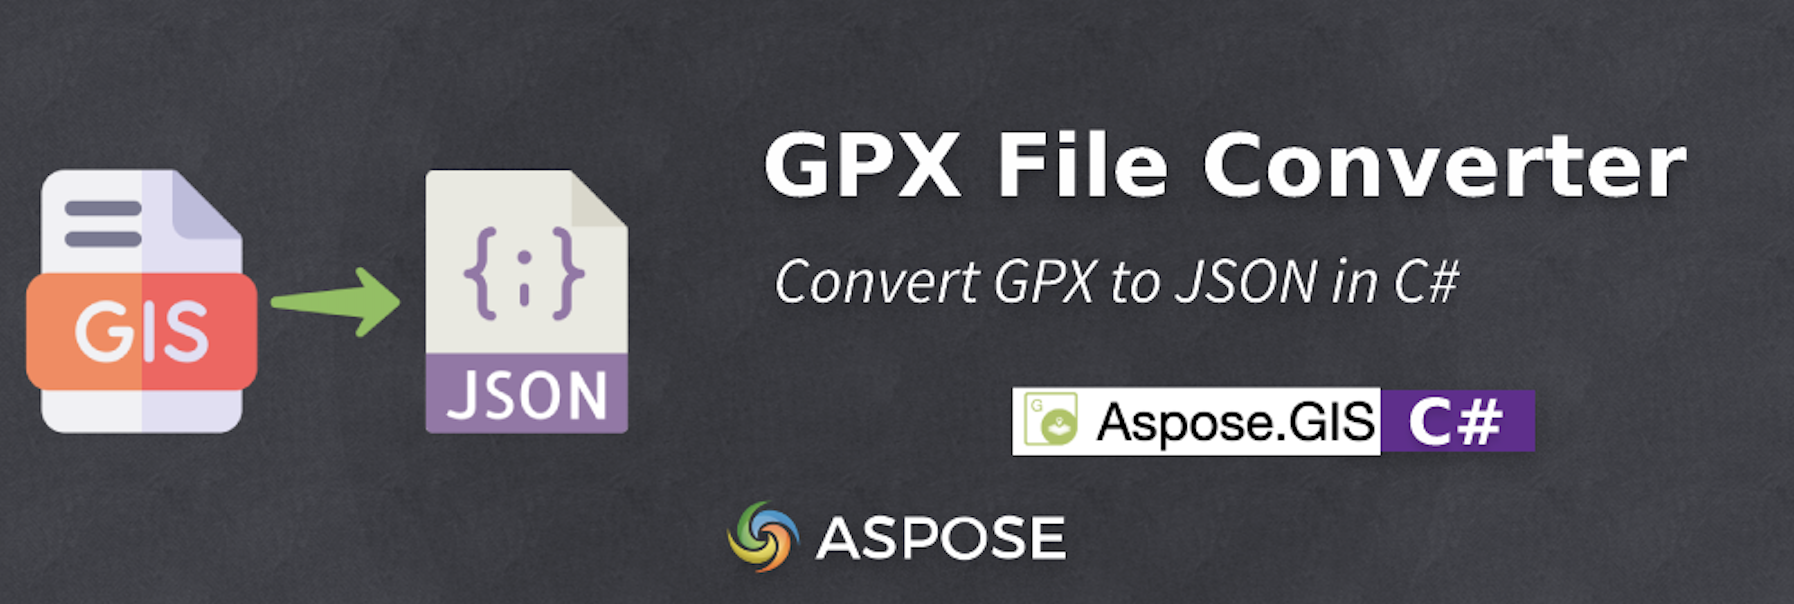 Convert GPX to JSON in C# - GPX File Converter